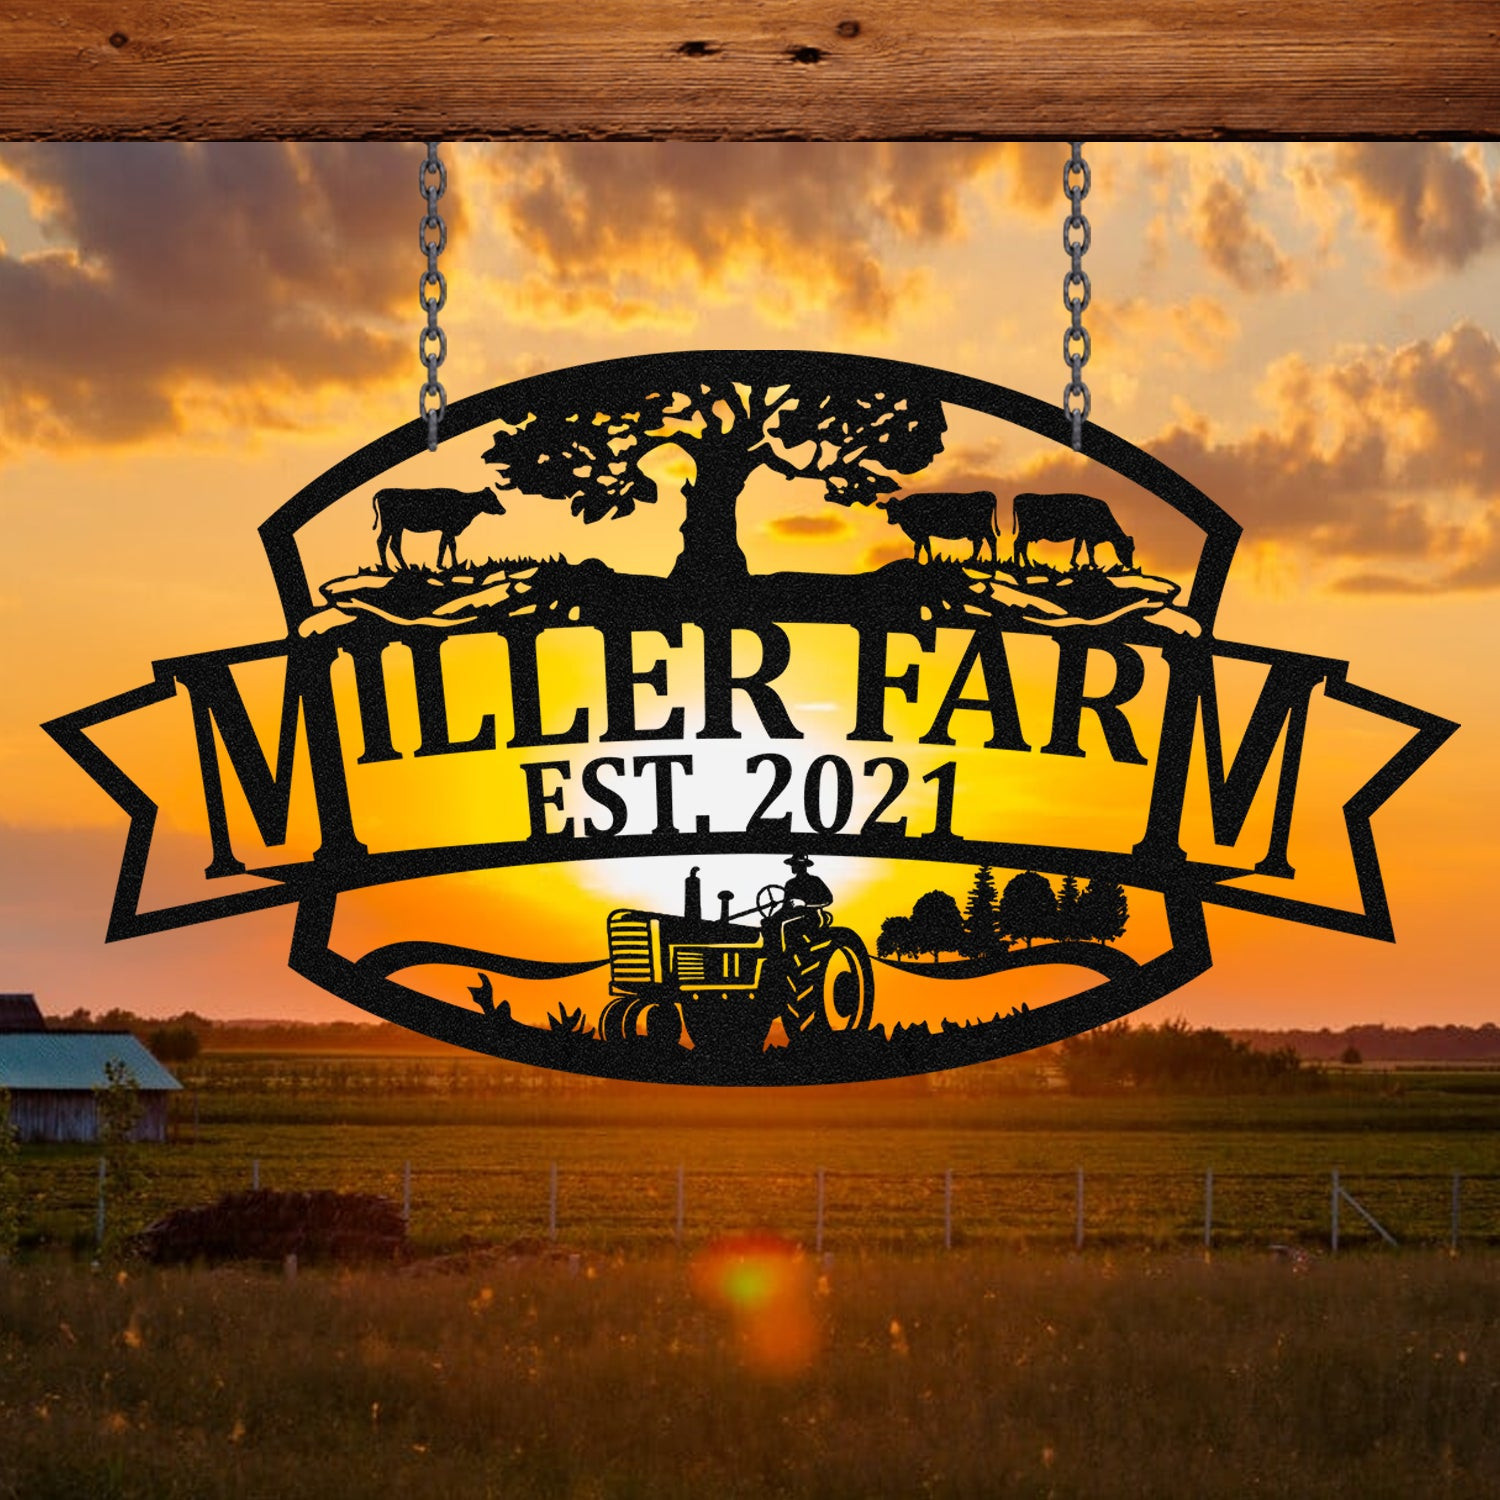 Personalized Metal Farm Sign Cow Tractor Monogram, Metal Laser Cut Metal Signs Custom Gift Ideas 14x14IN